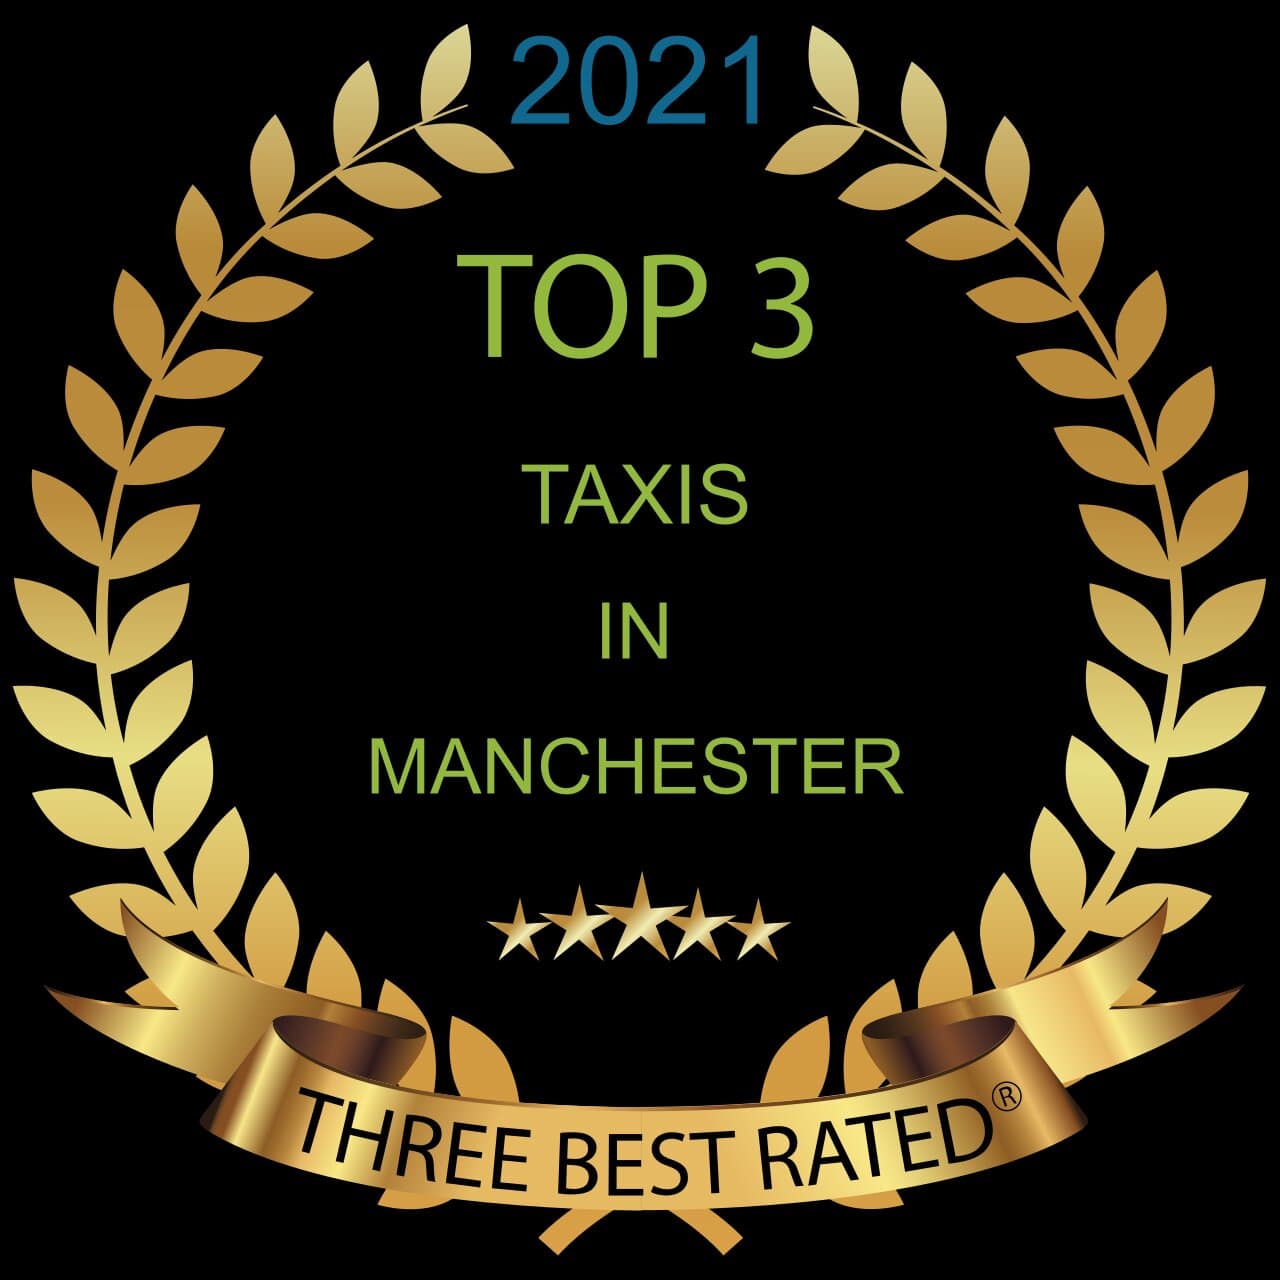 Huddersfield to Manchester Airport Taxi